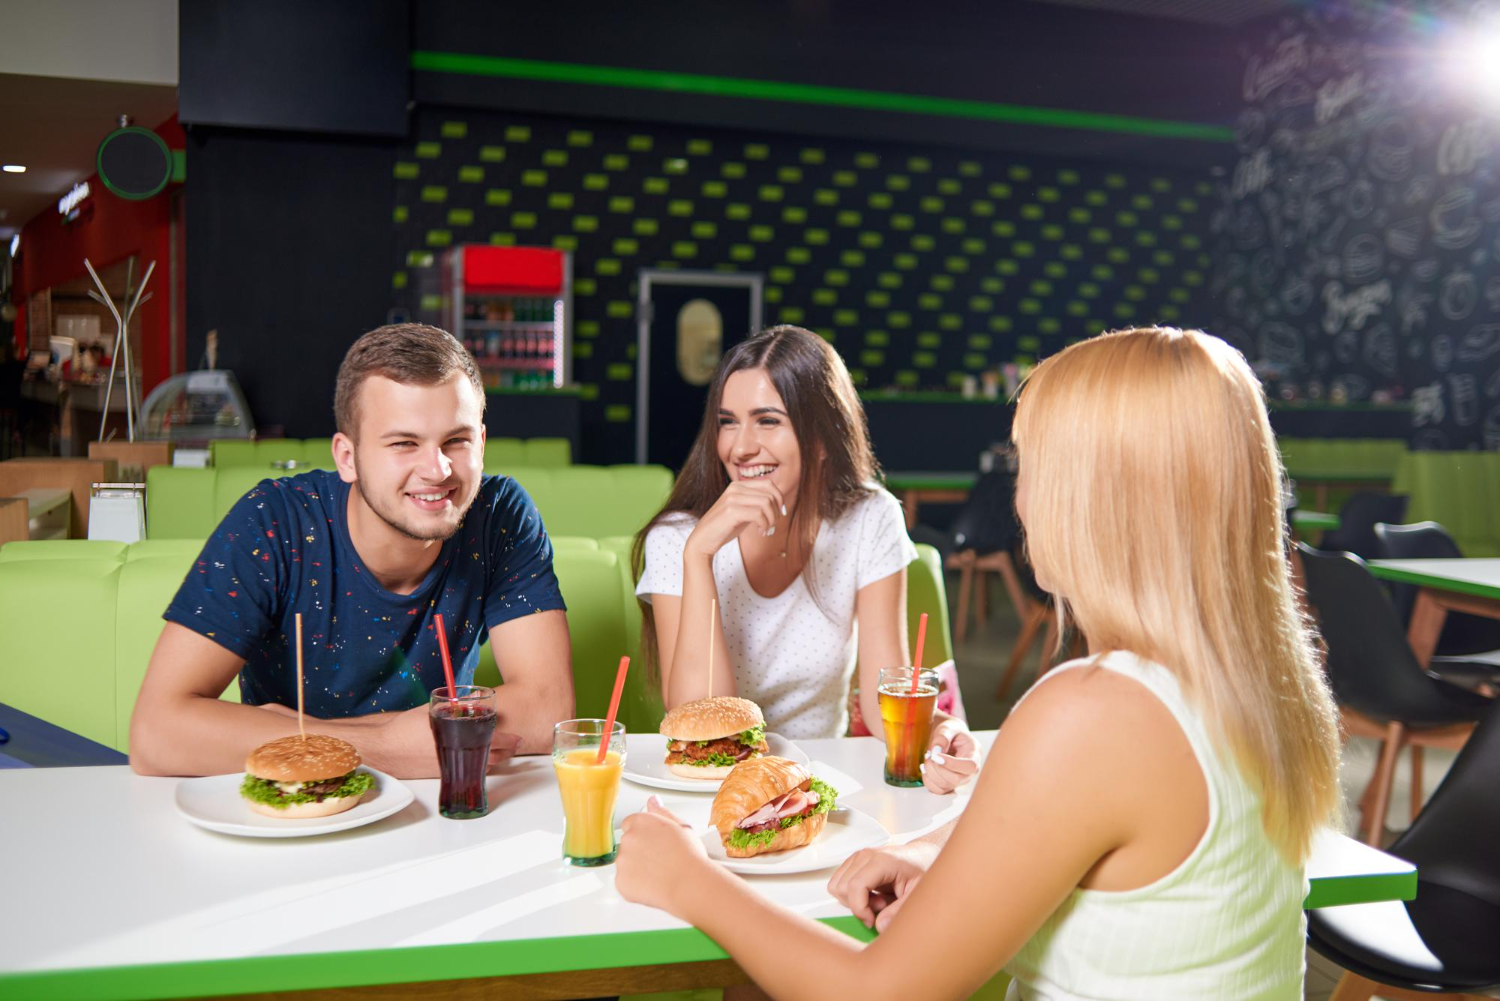 A man and two women sit at a booth at a fast casual restaurant, enjoying sandwiches and drinks while smiling and laughing with each other.